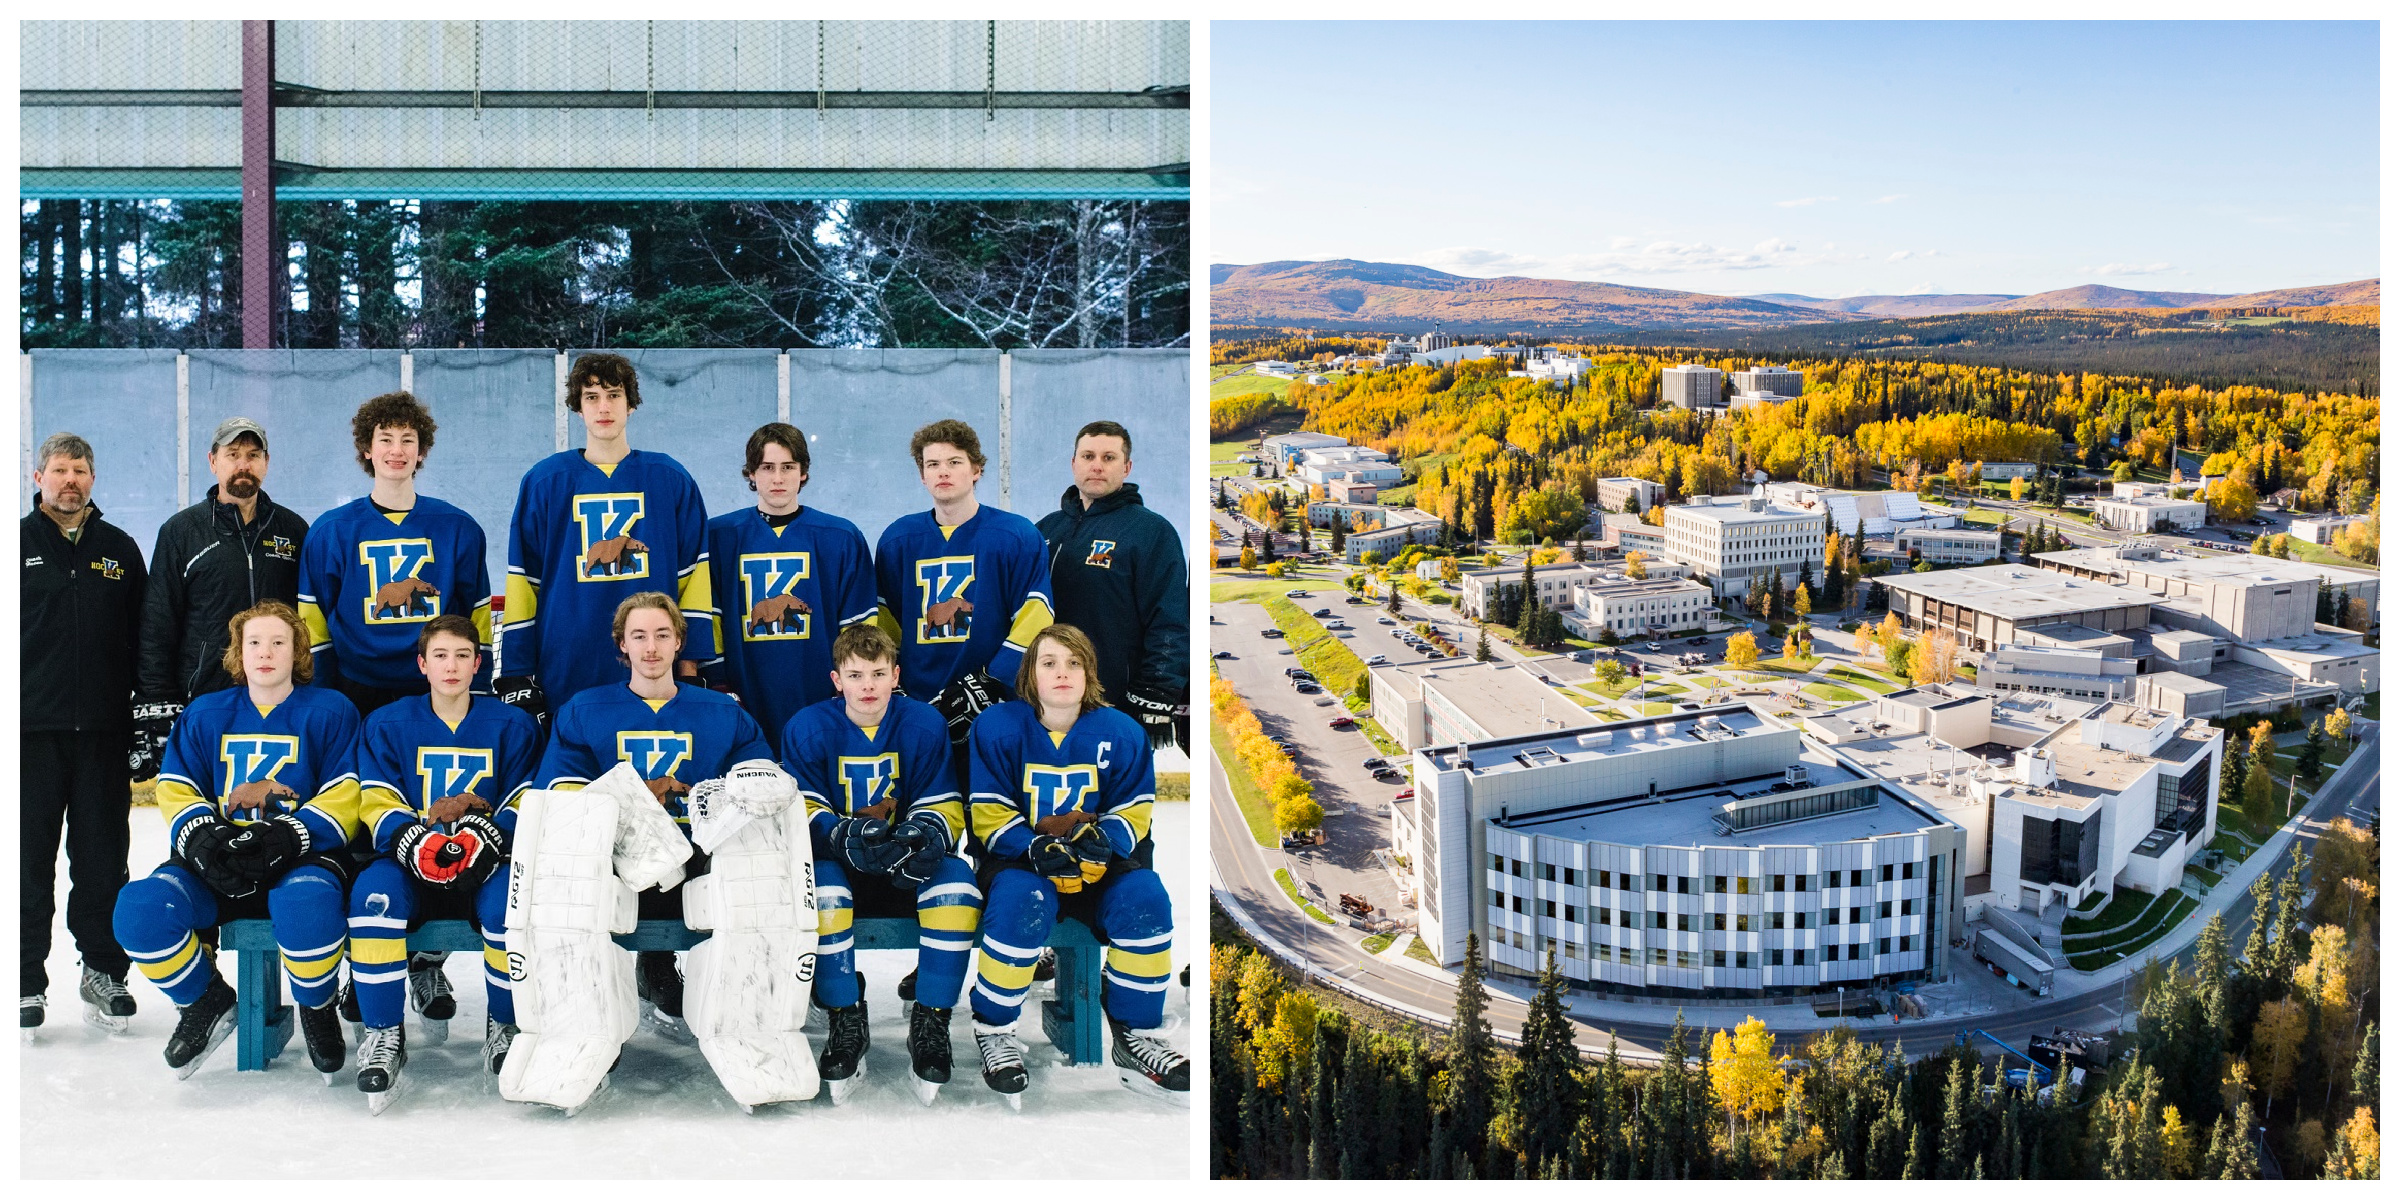 Image 1: a hockey team poses for the camera inside a hockey rink. Image 2: an aerial shot of new facilities at the University of Alaska Fairbanks. 